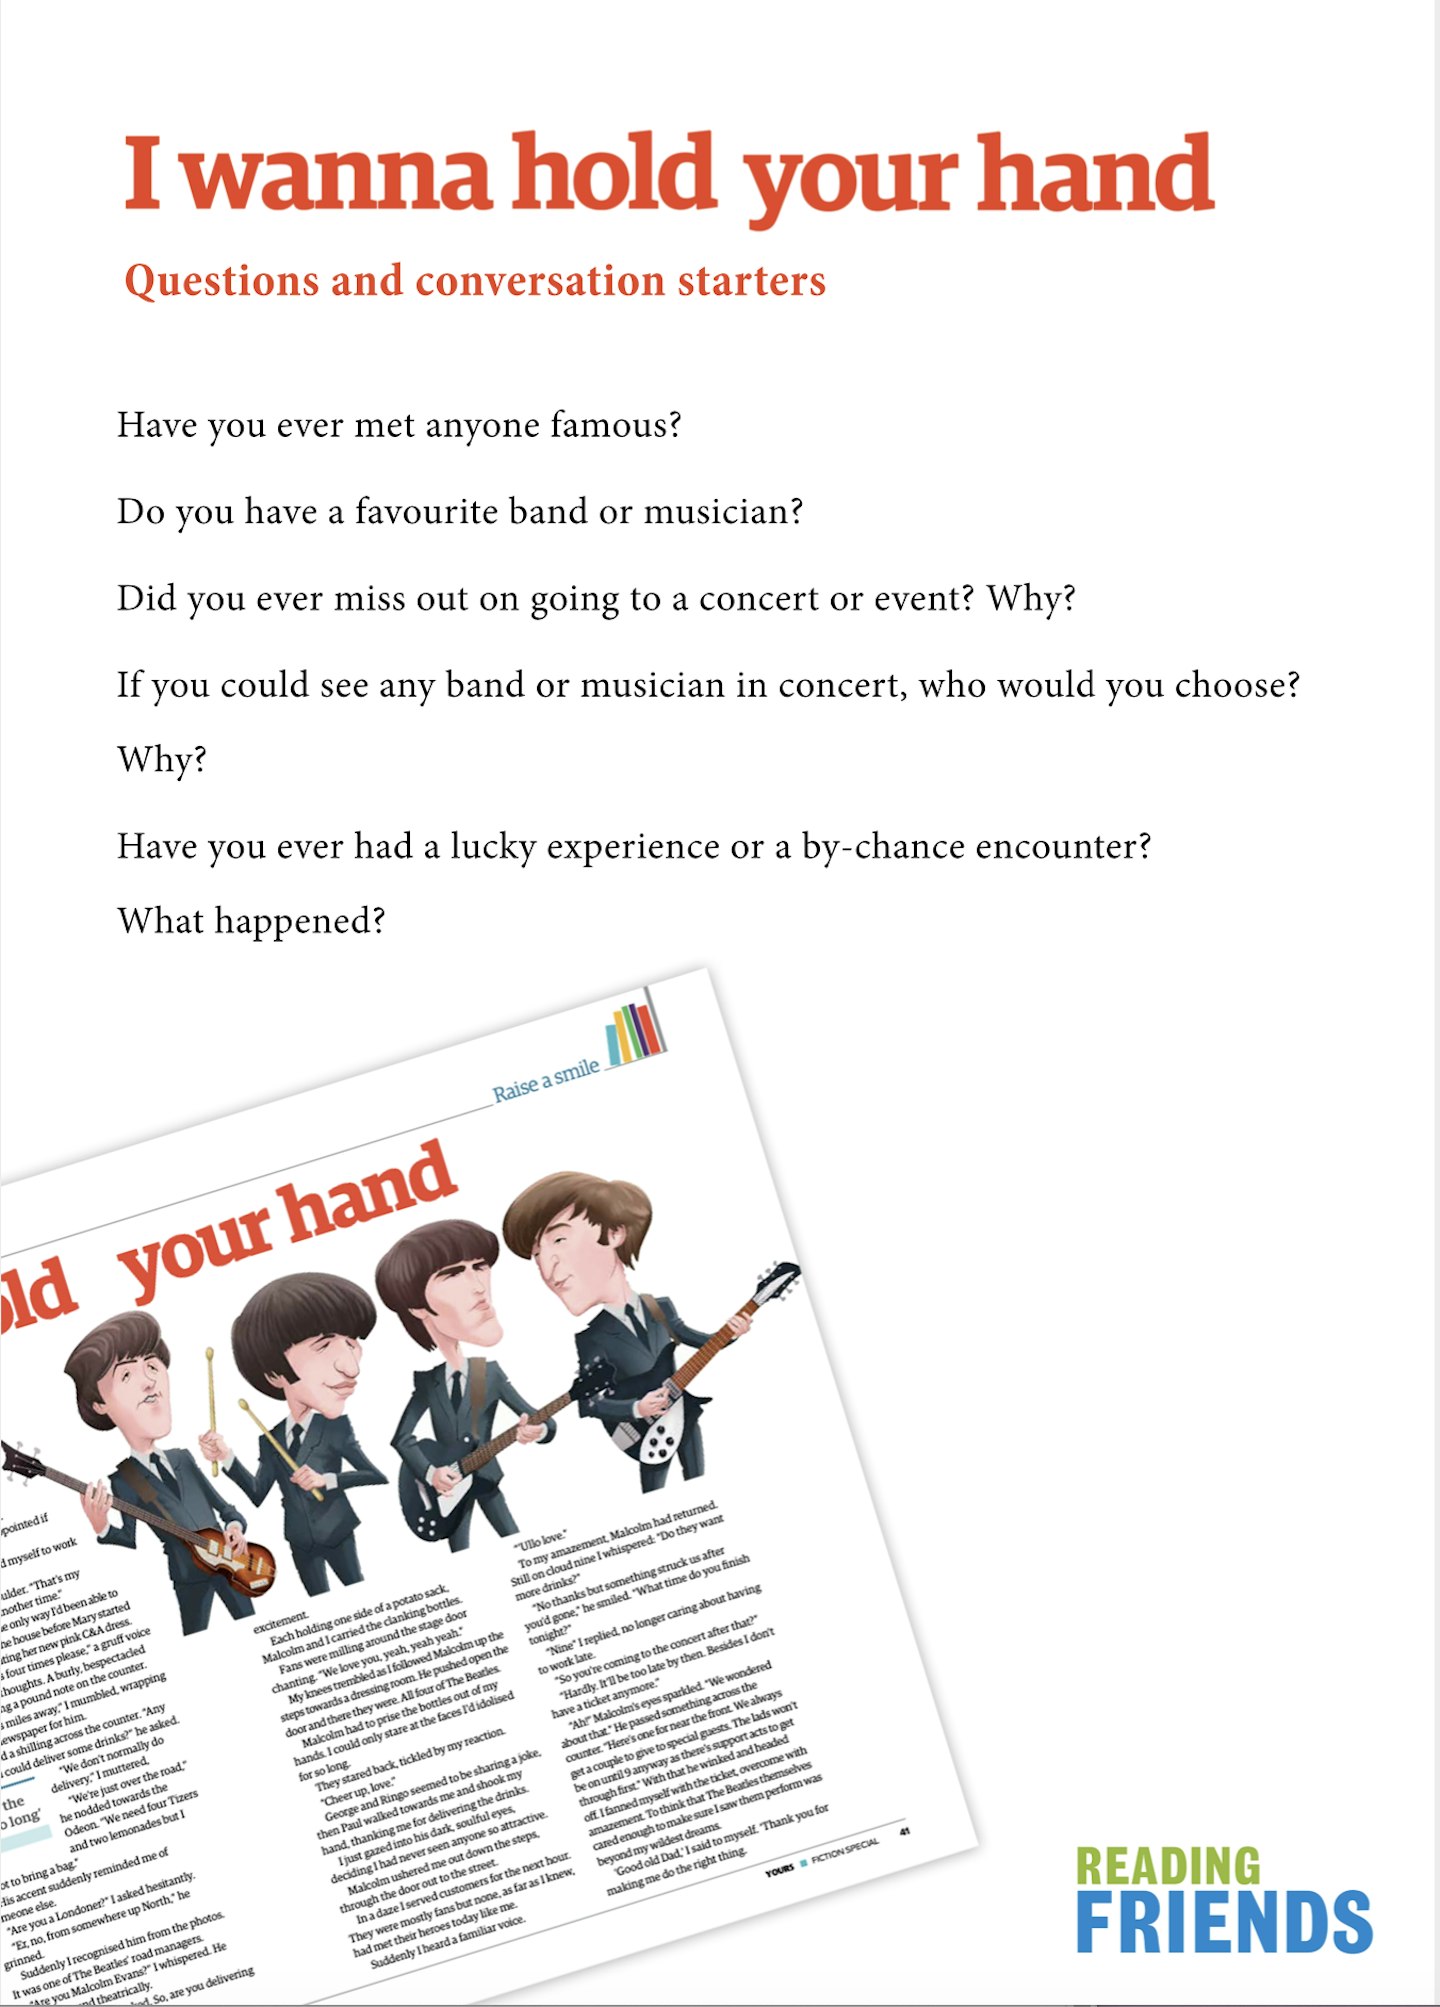 Example of one of the questions pages in the toolkit